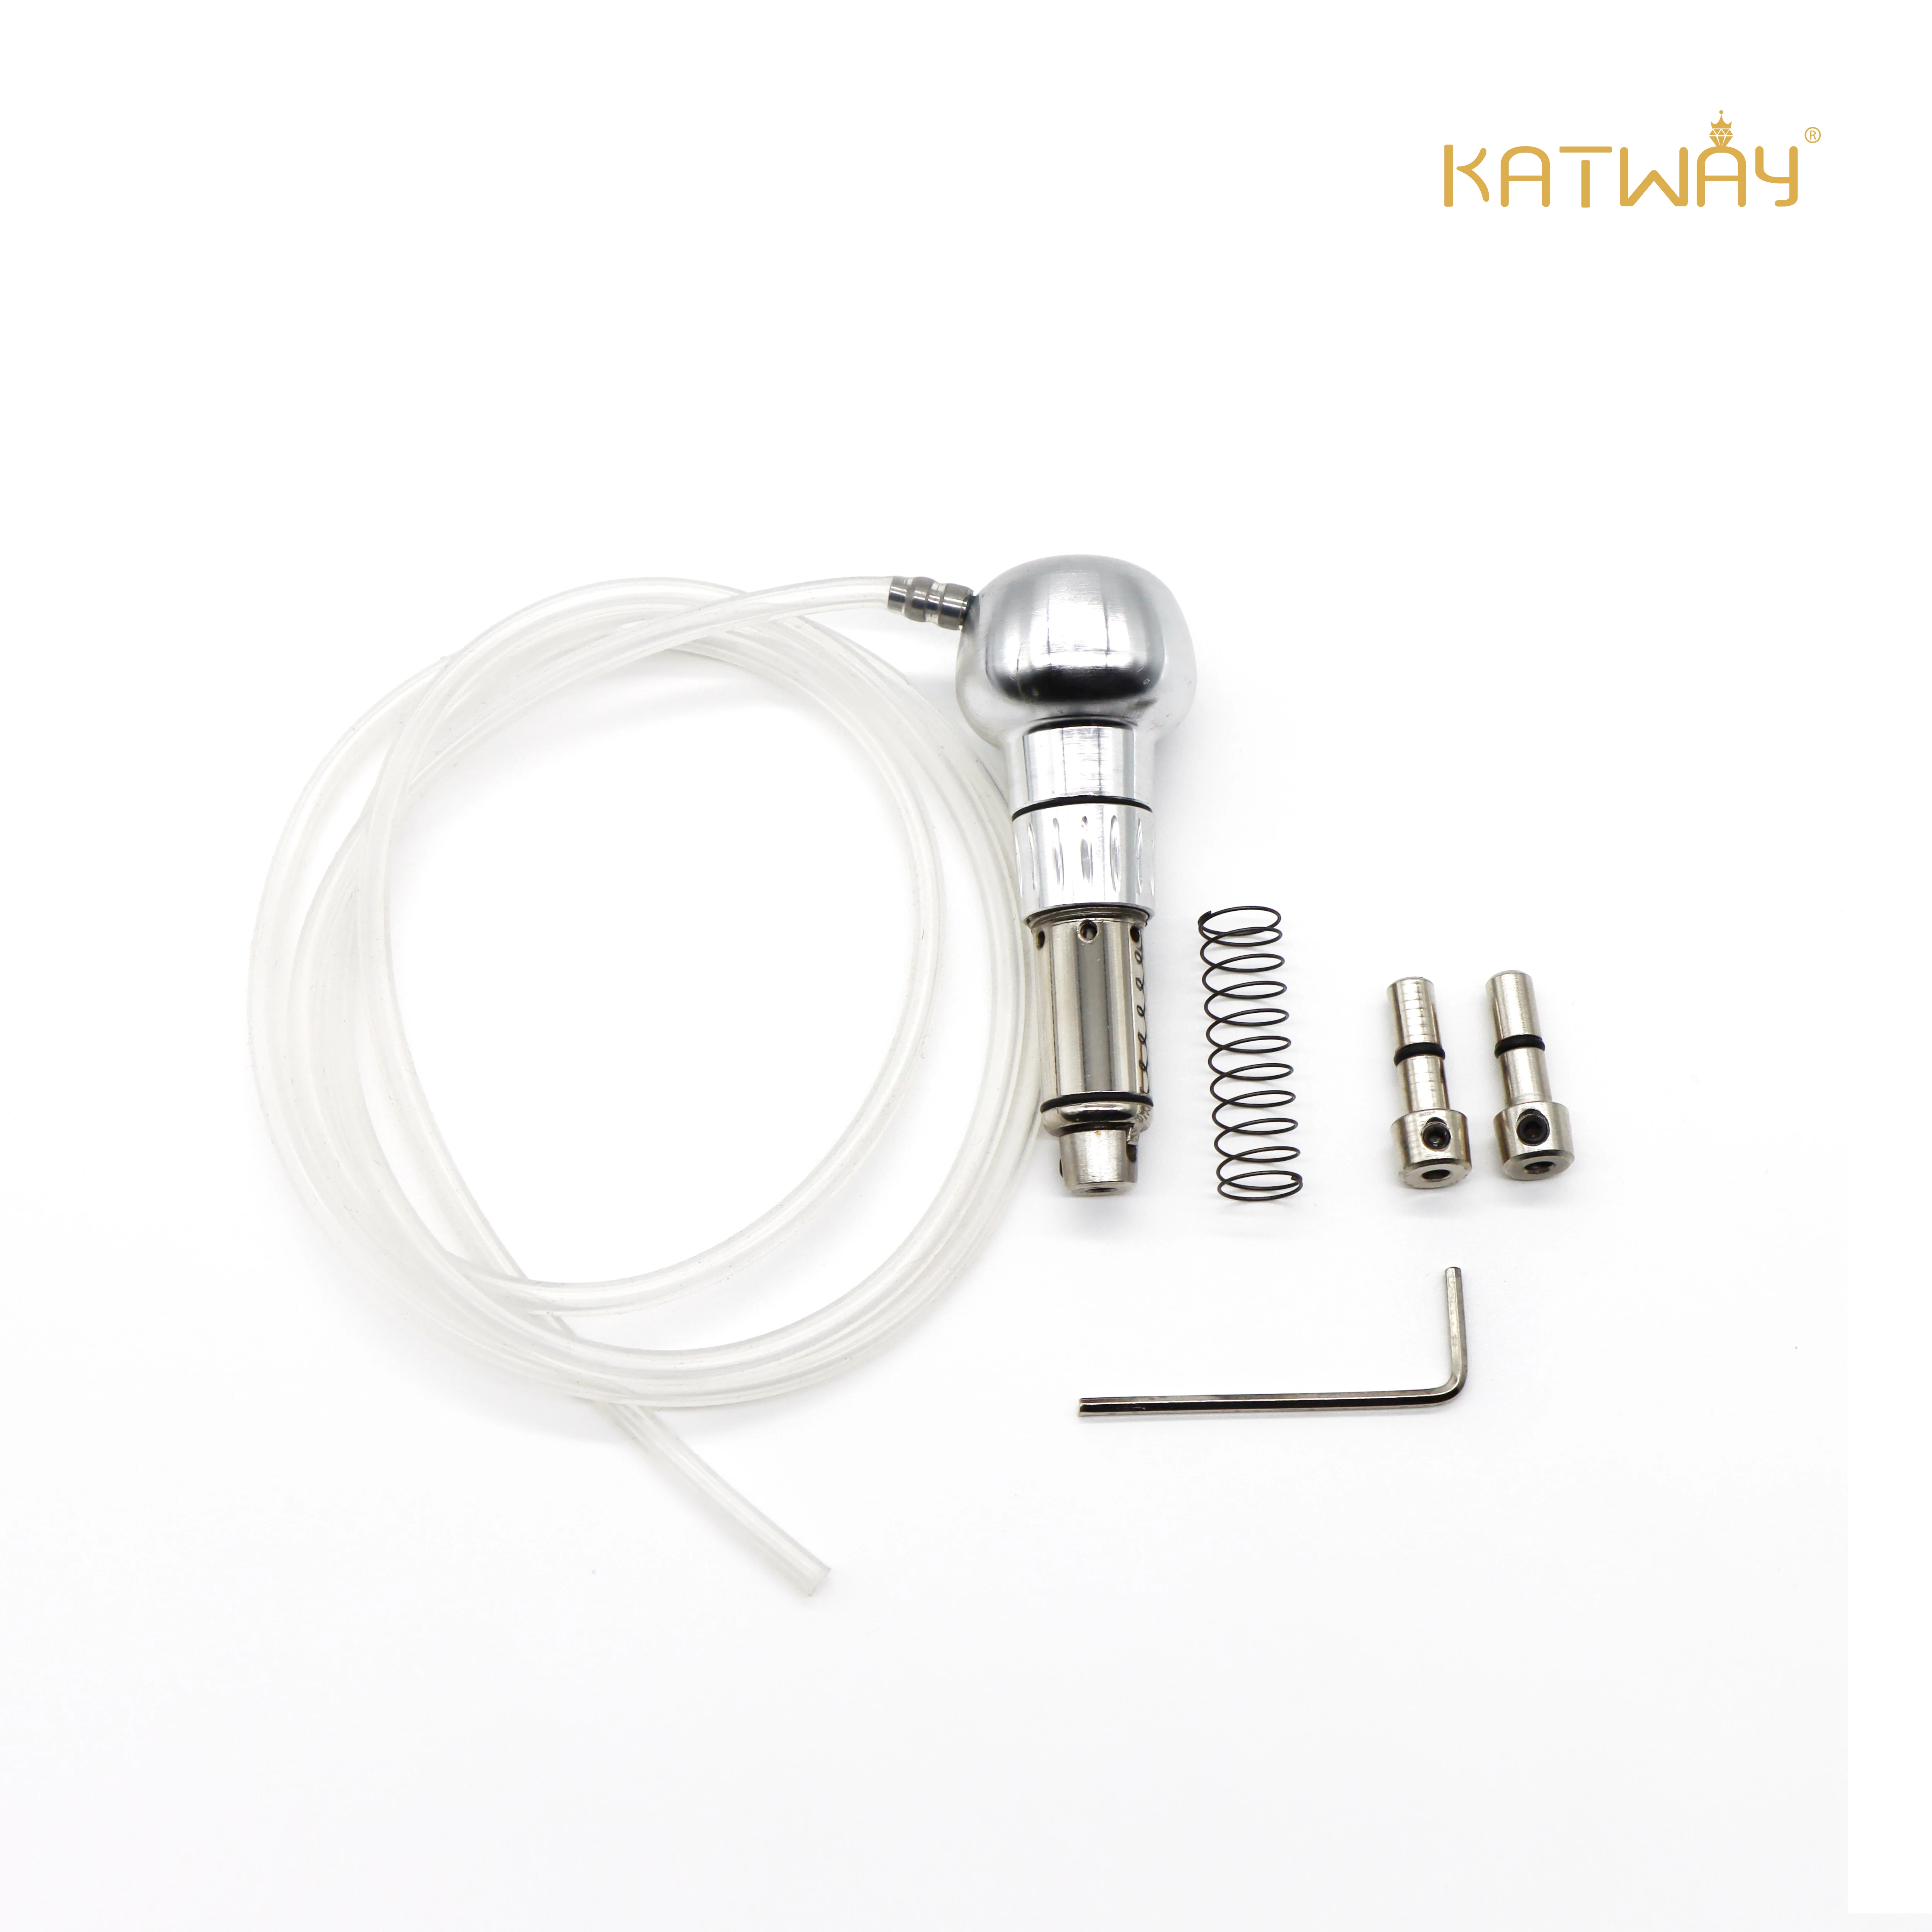 

KATWAY Graver Handle Hand Piece For Engraving Machine Pneumatic Jewelry Making Tools for Crafting Metal AT-Handpiece HH-ATH02